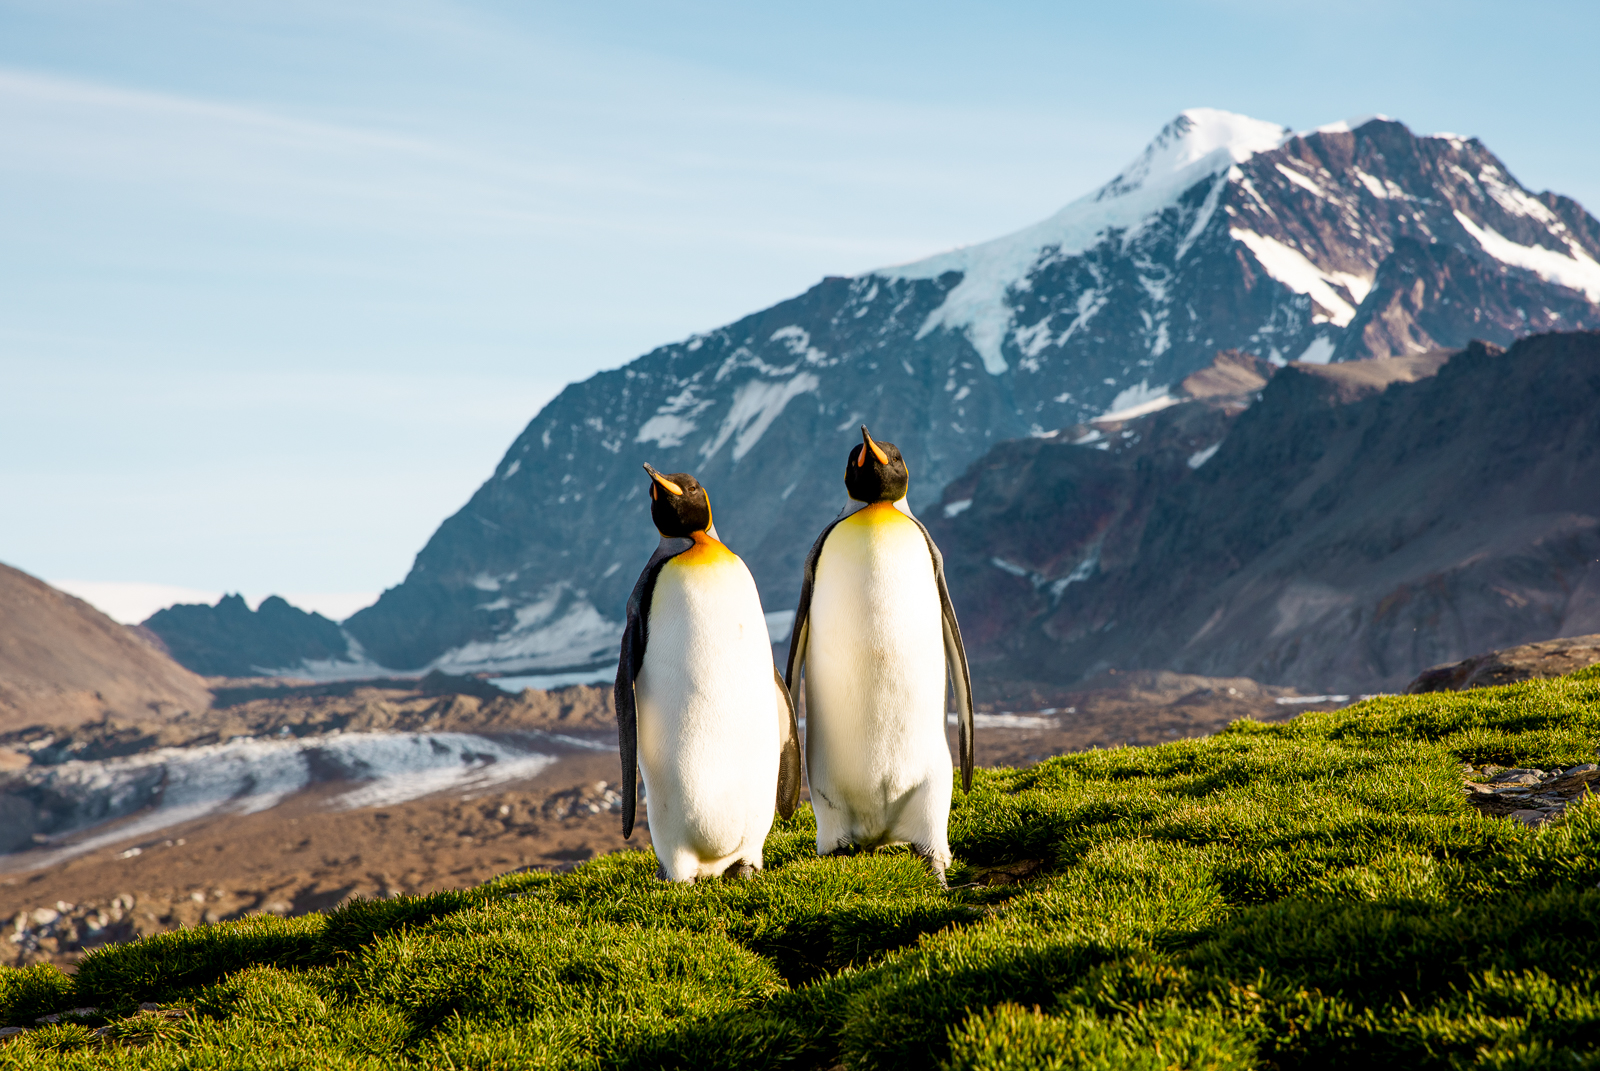 A couple of penguins spotted in South Georgia, Antarctica